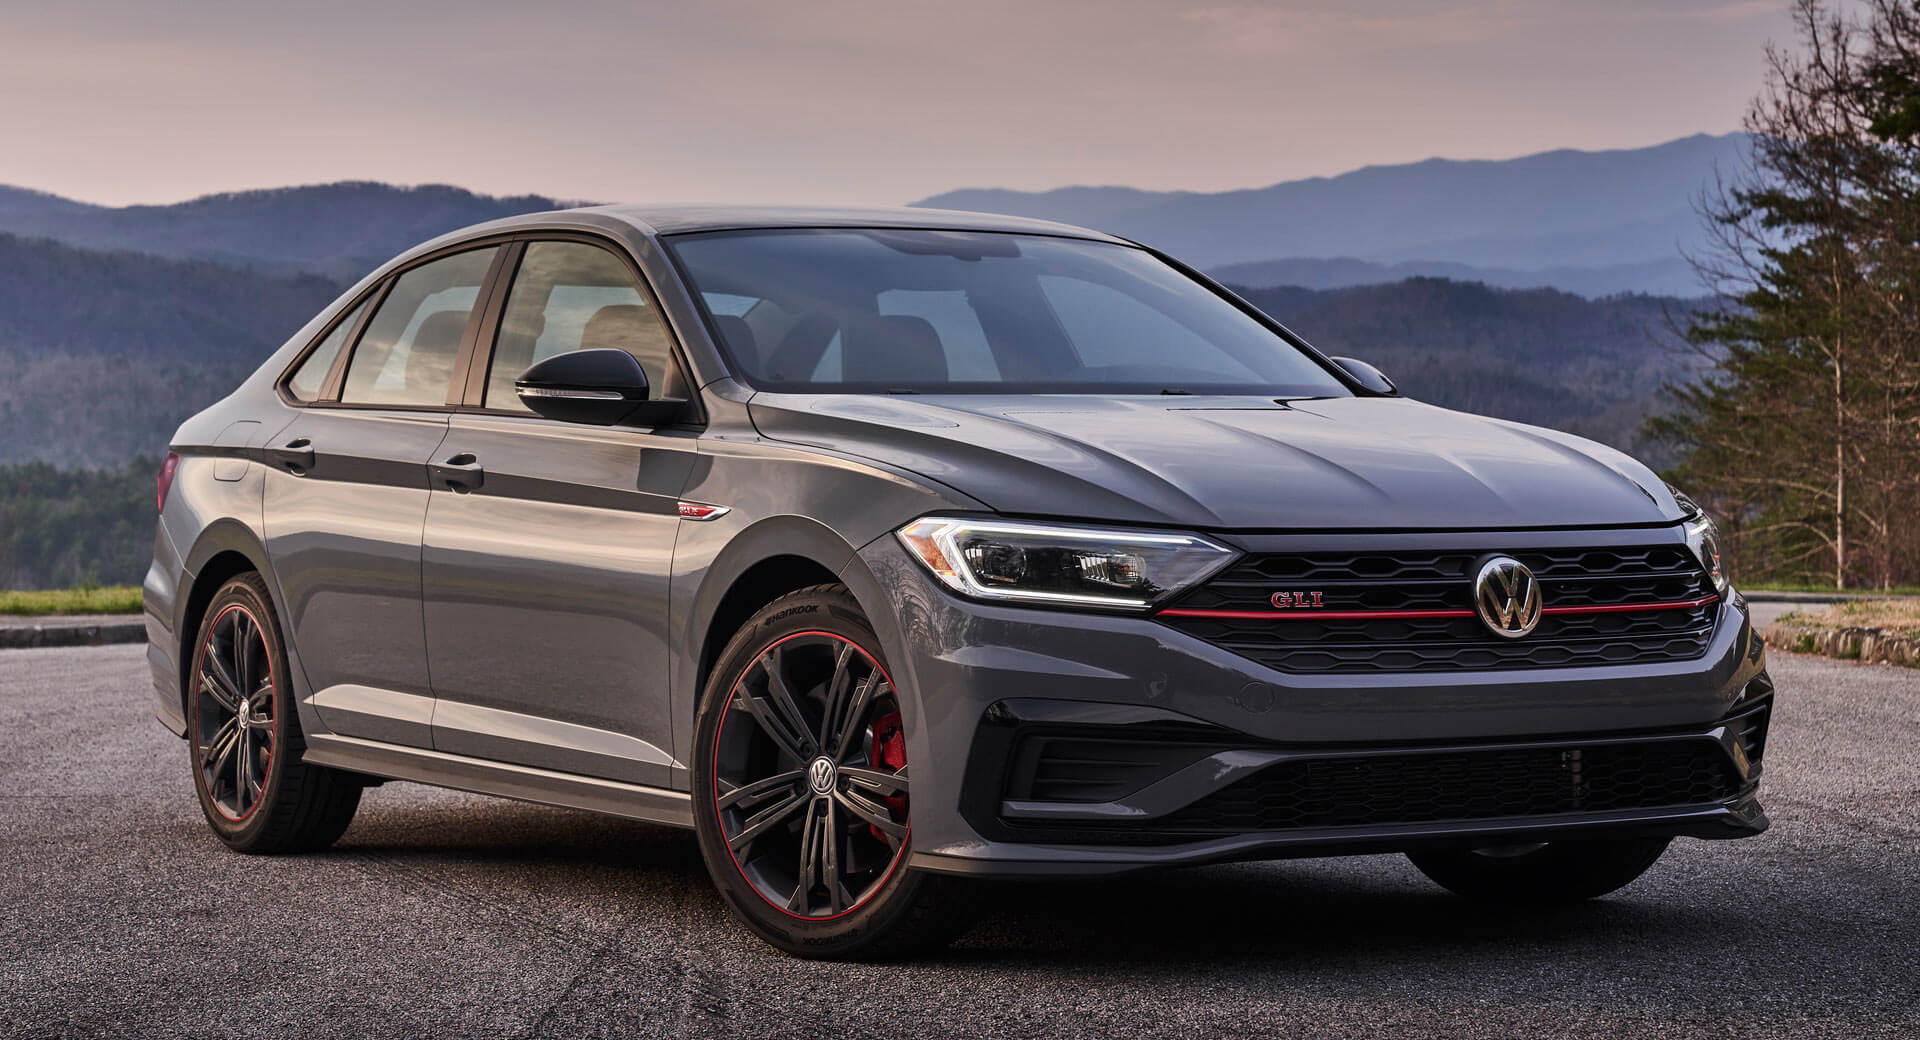 2019 VW Jetta Awarded 5Star Safety Rating By The NHTSA